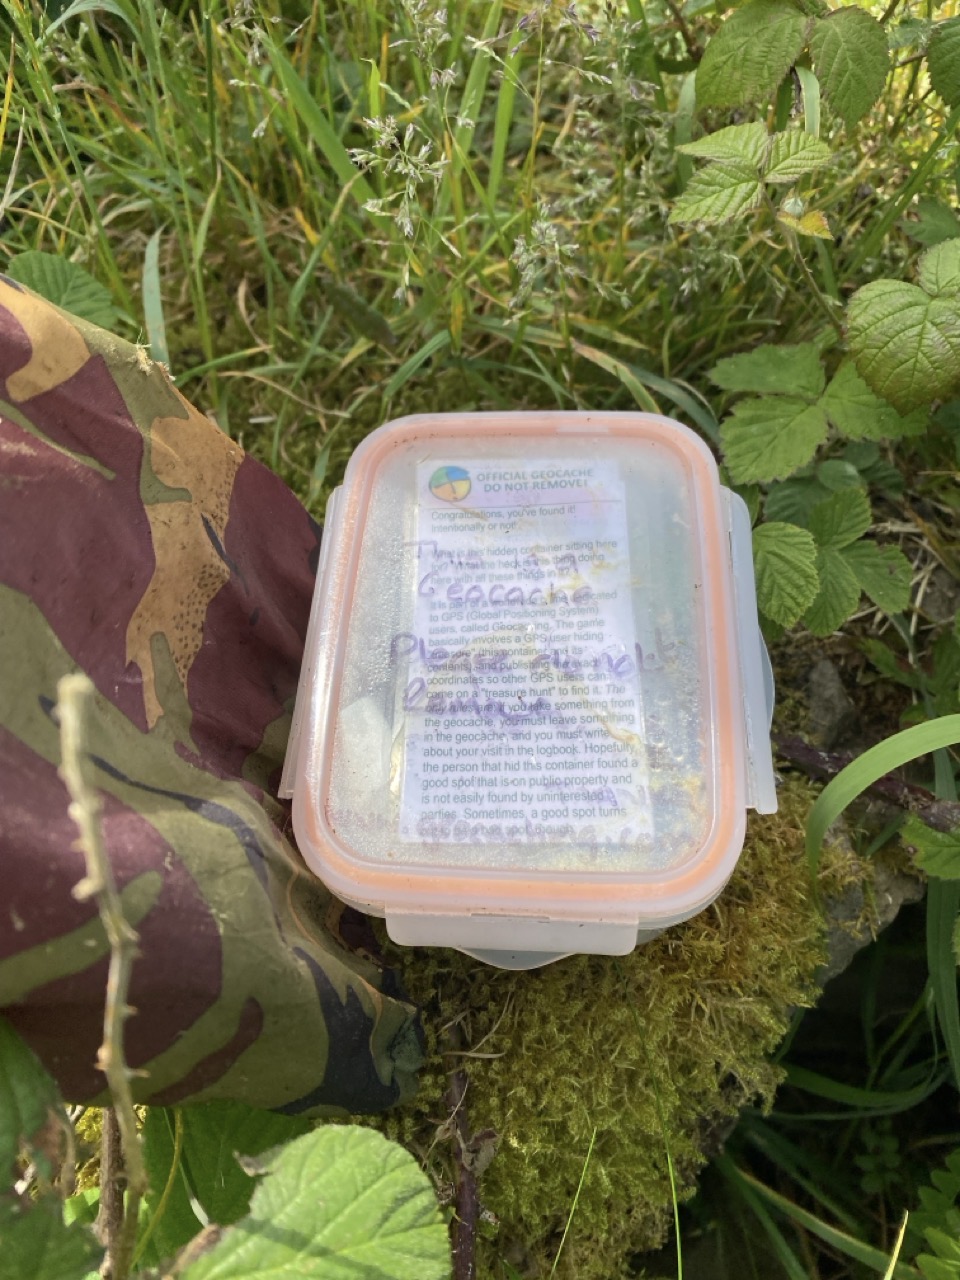 A geocache box. There’s a label on it explaining what it is.